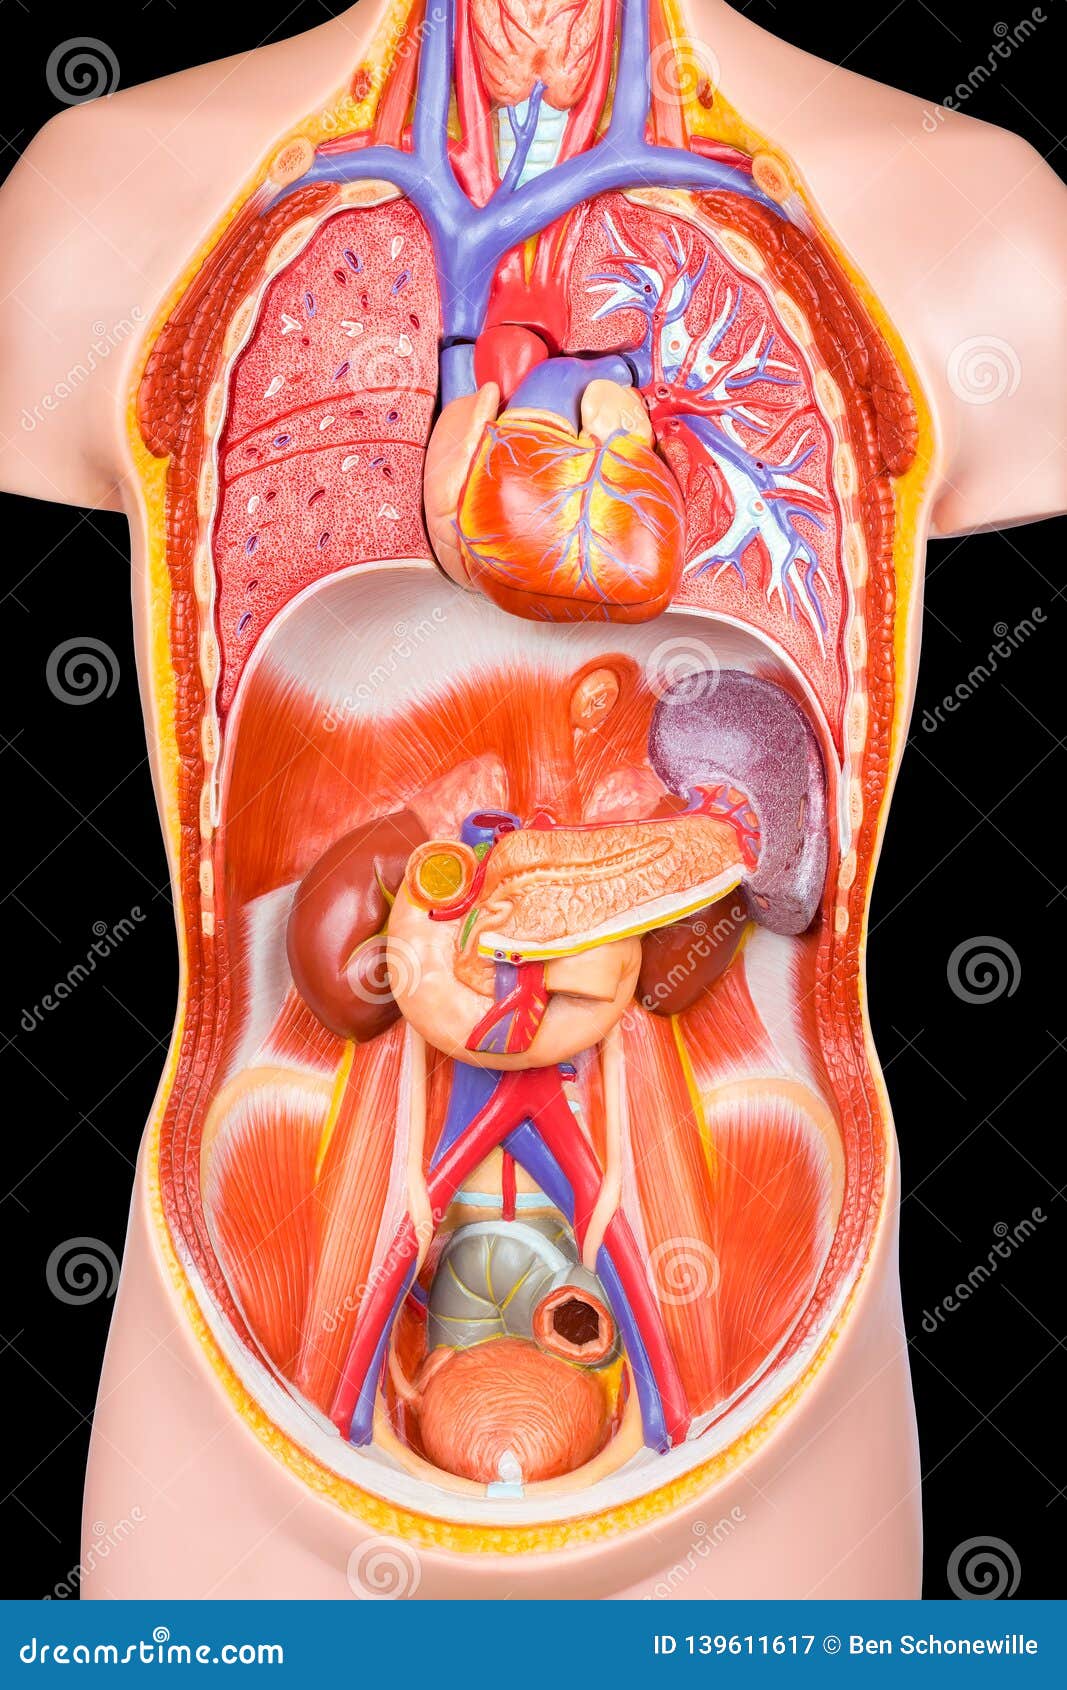 Torso Model Anatomy Labeled - Tissues And Organs The Human ...